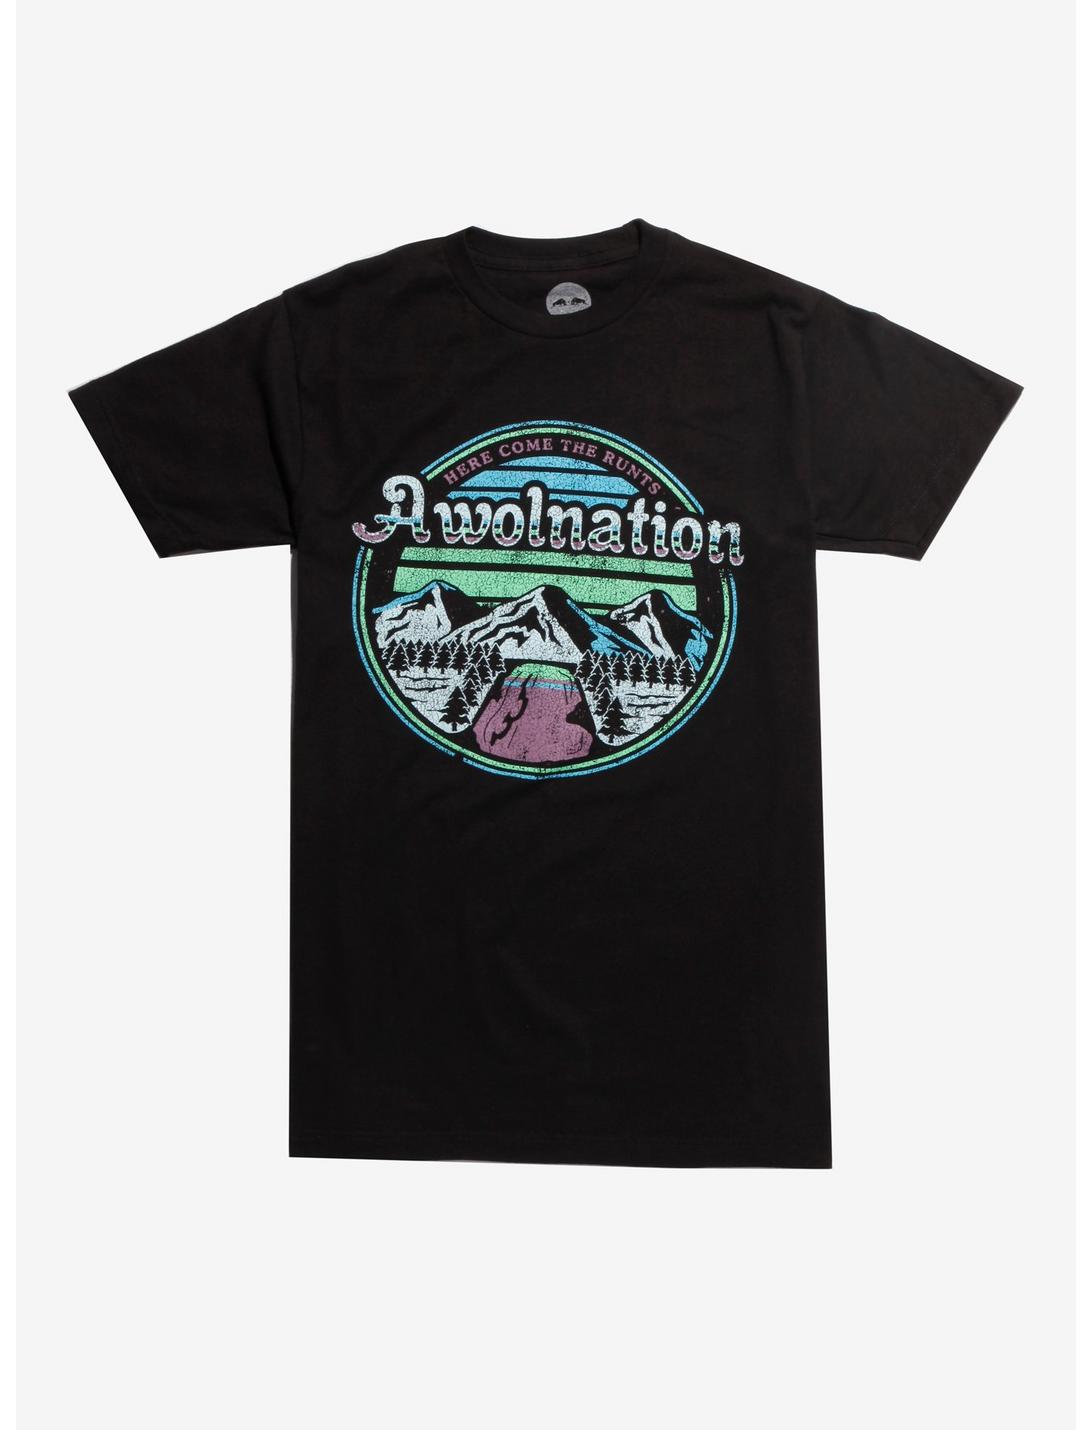 Awolnation Here Comes The Runts T-Shirt, BLACK, hi-res